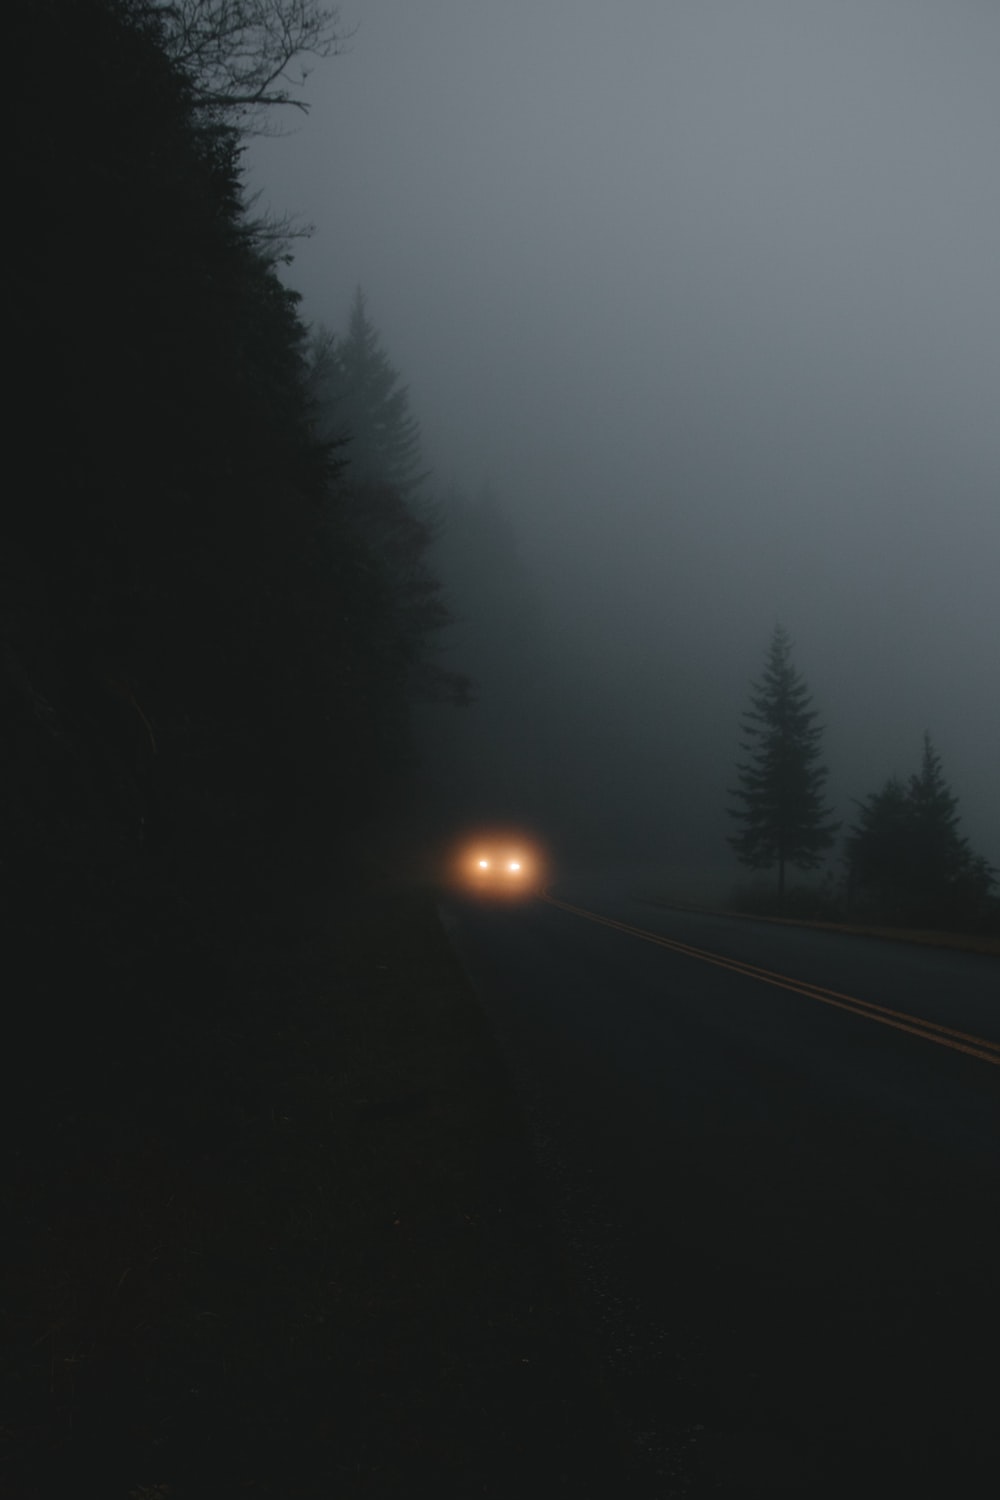 Foggy Night Picture. Download Free Image